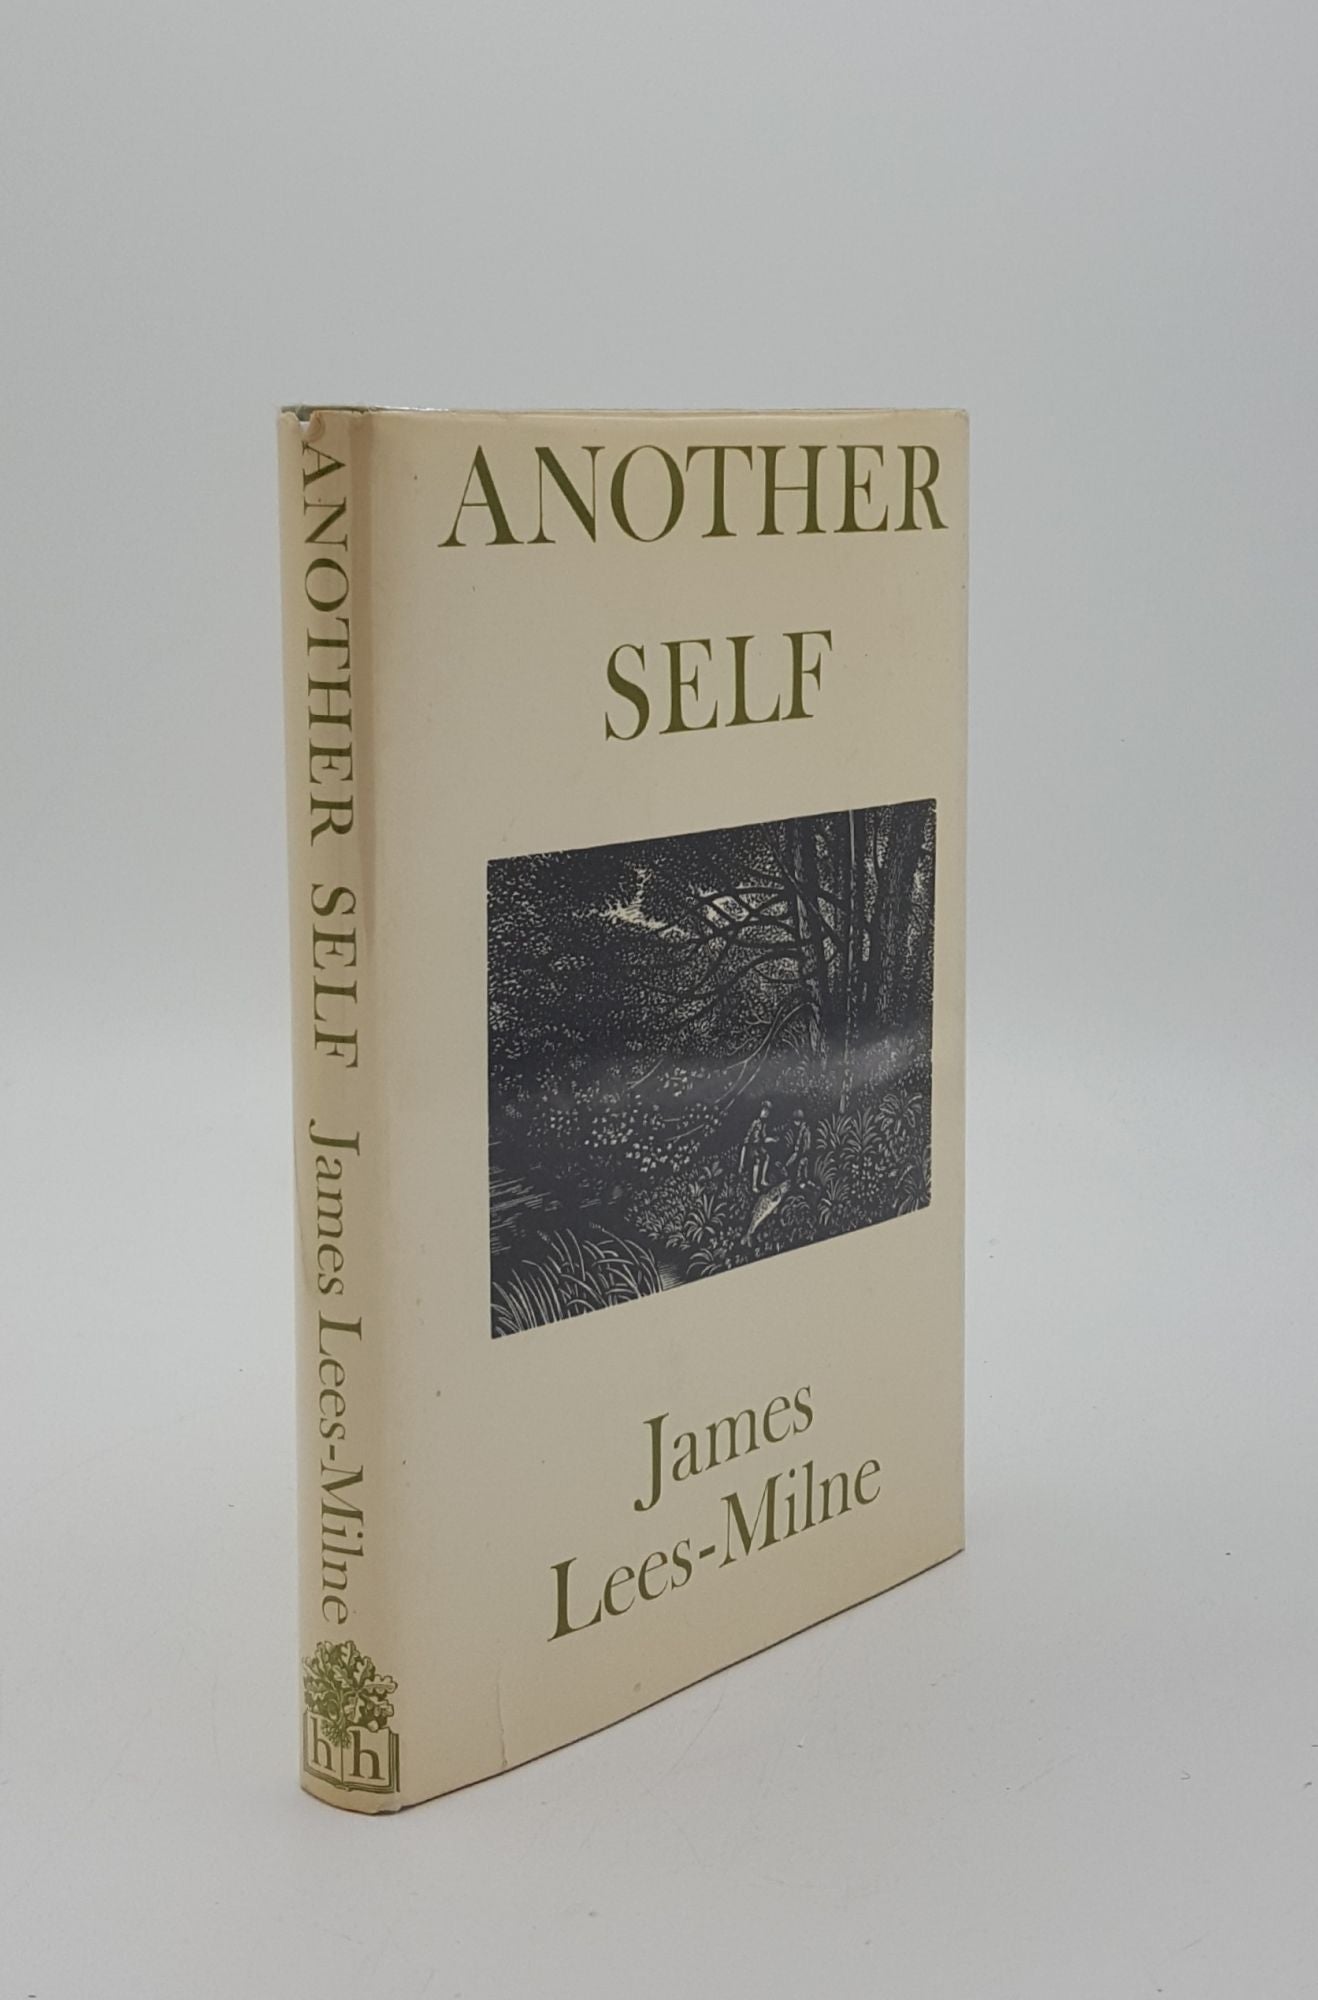 LEES-MILNE James - Another Self